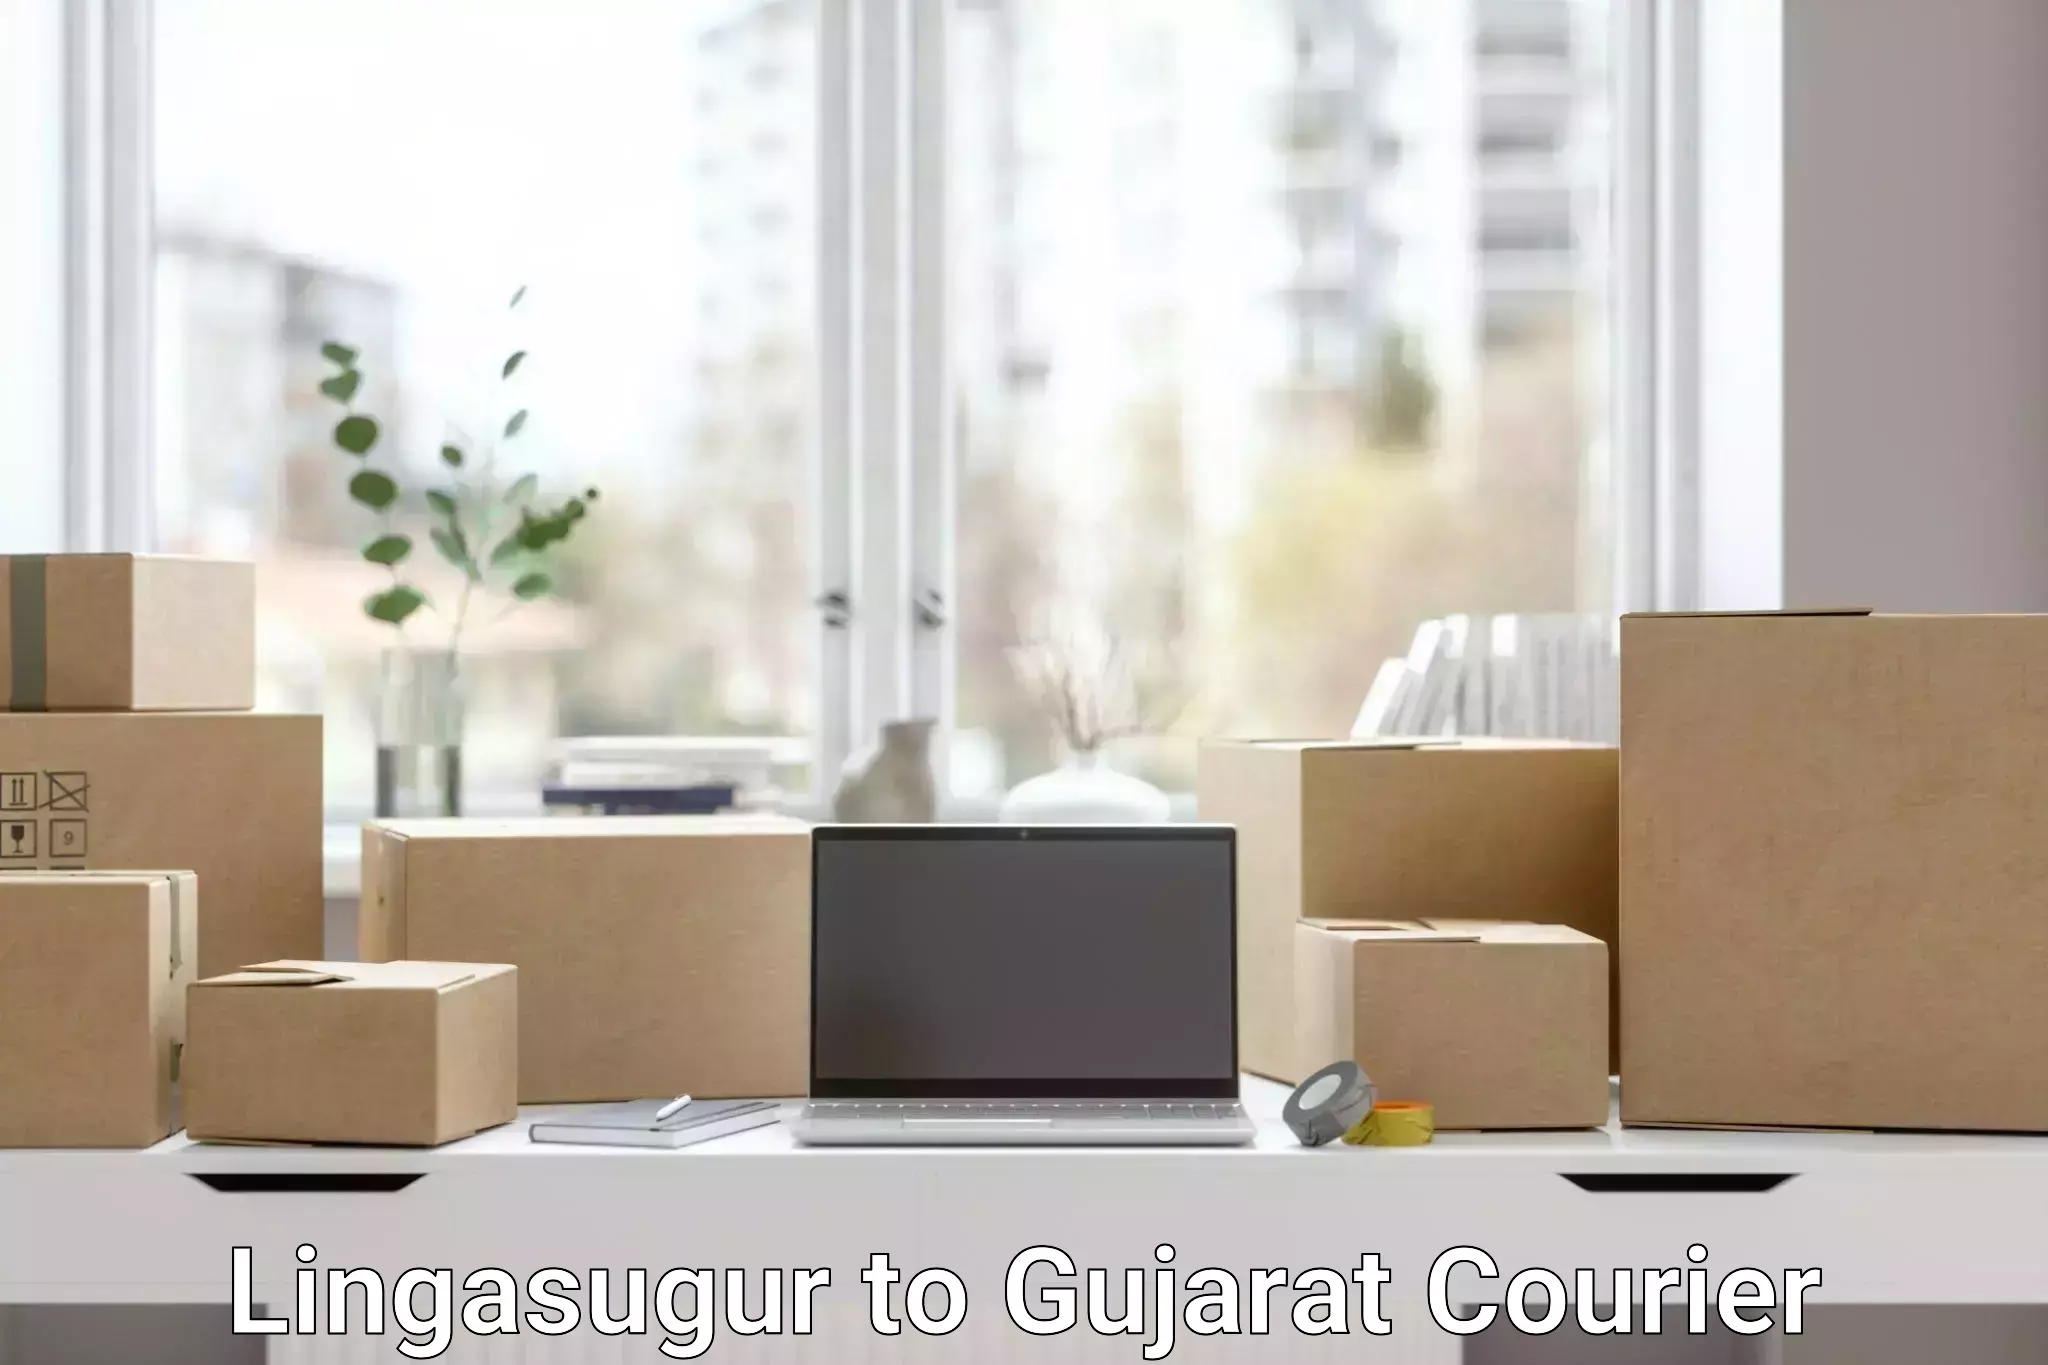 Nationwide courier service Lingasugur to Gujarat